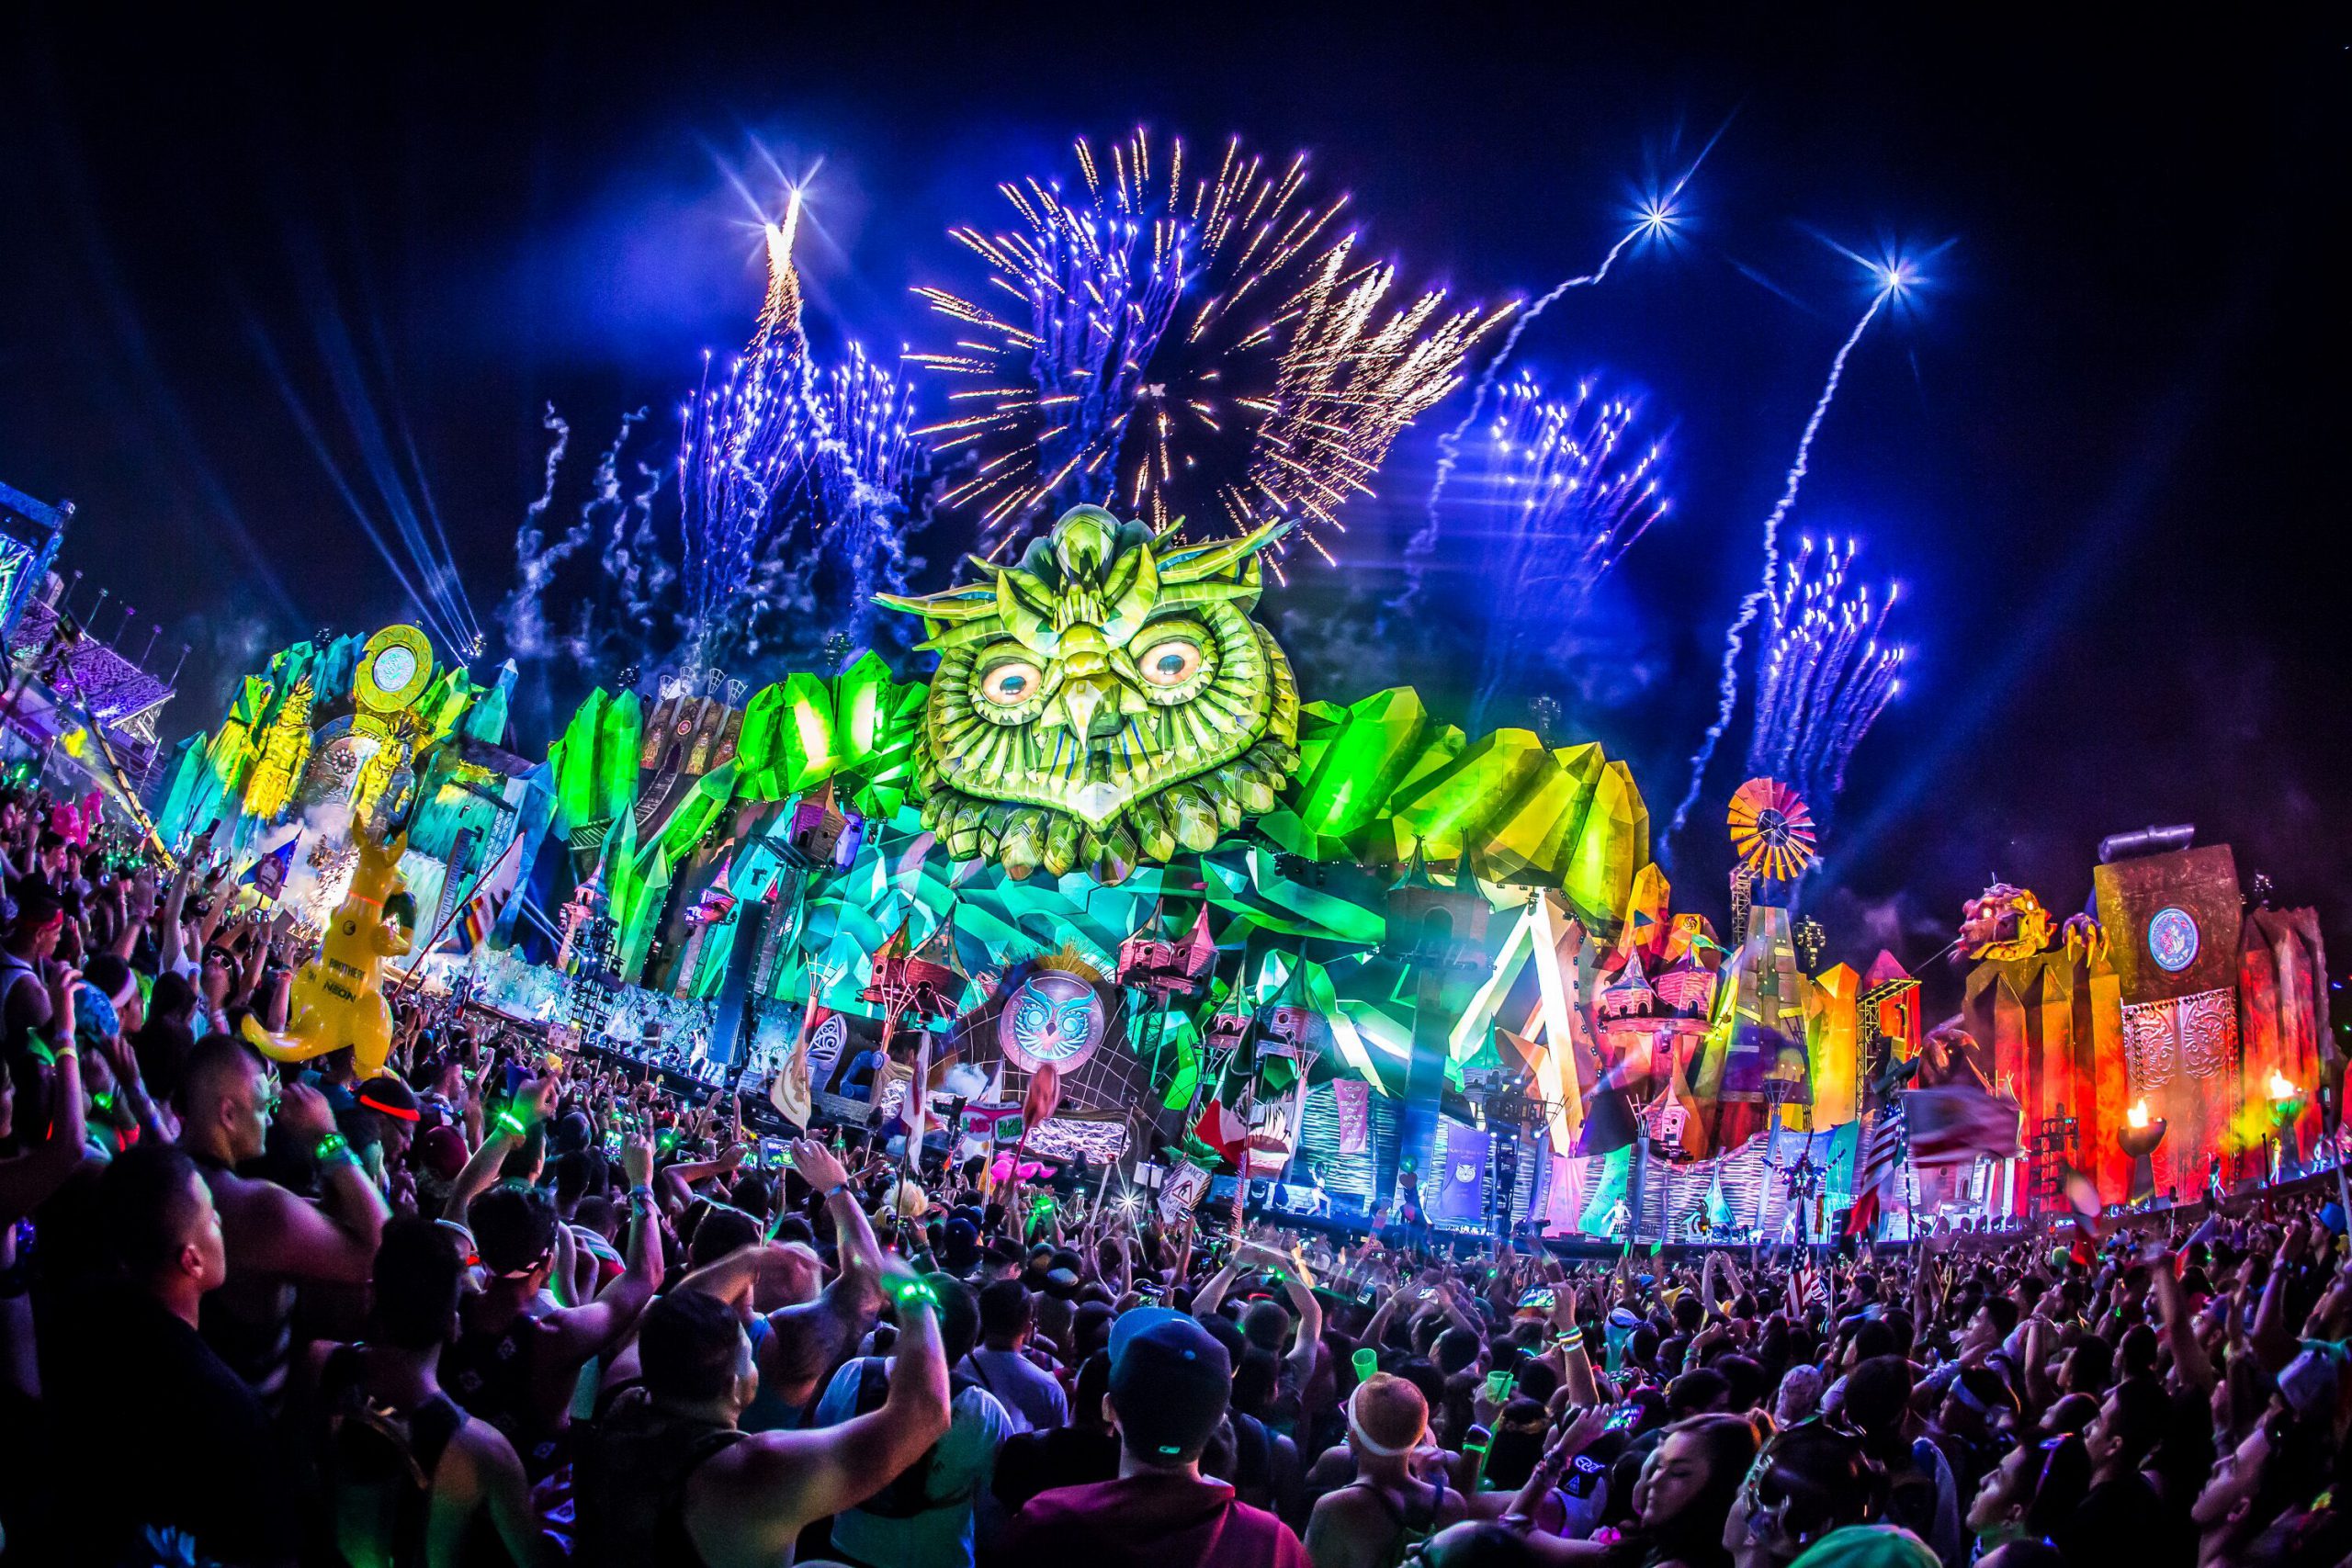 electric daisy carnival finally scheduled for may 2021, date and all detailed information !